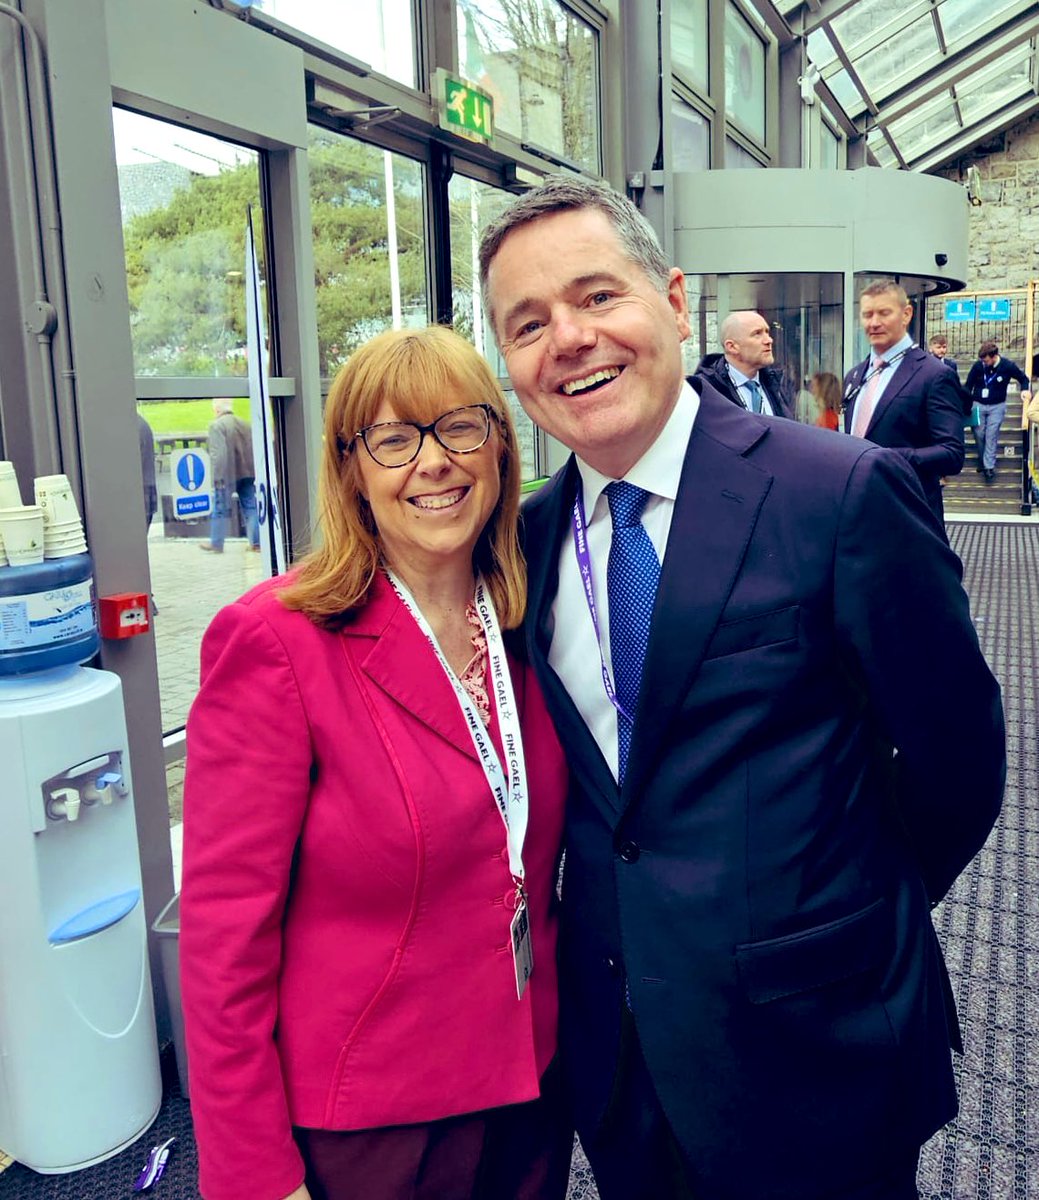 Rehab Group’s Head of Advocacy & Campaigns, Emer Costello, meets Minister Paschal Donohoe at the Fine Gael Ard Fheis in Galway. Emer is attending #FGAF24 today setting forth our vision for the disability sector and the voices of people in our services.